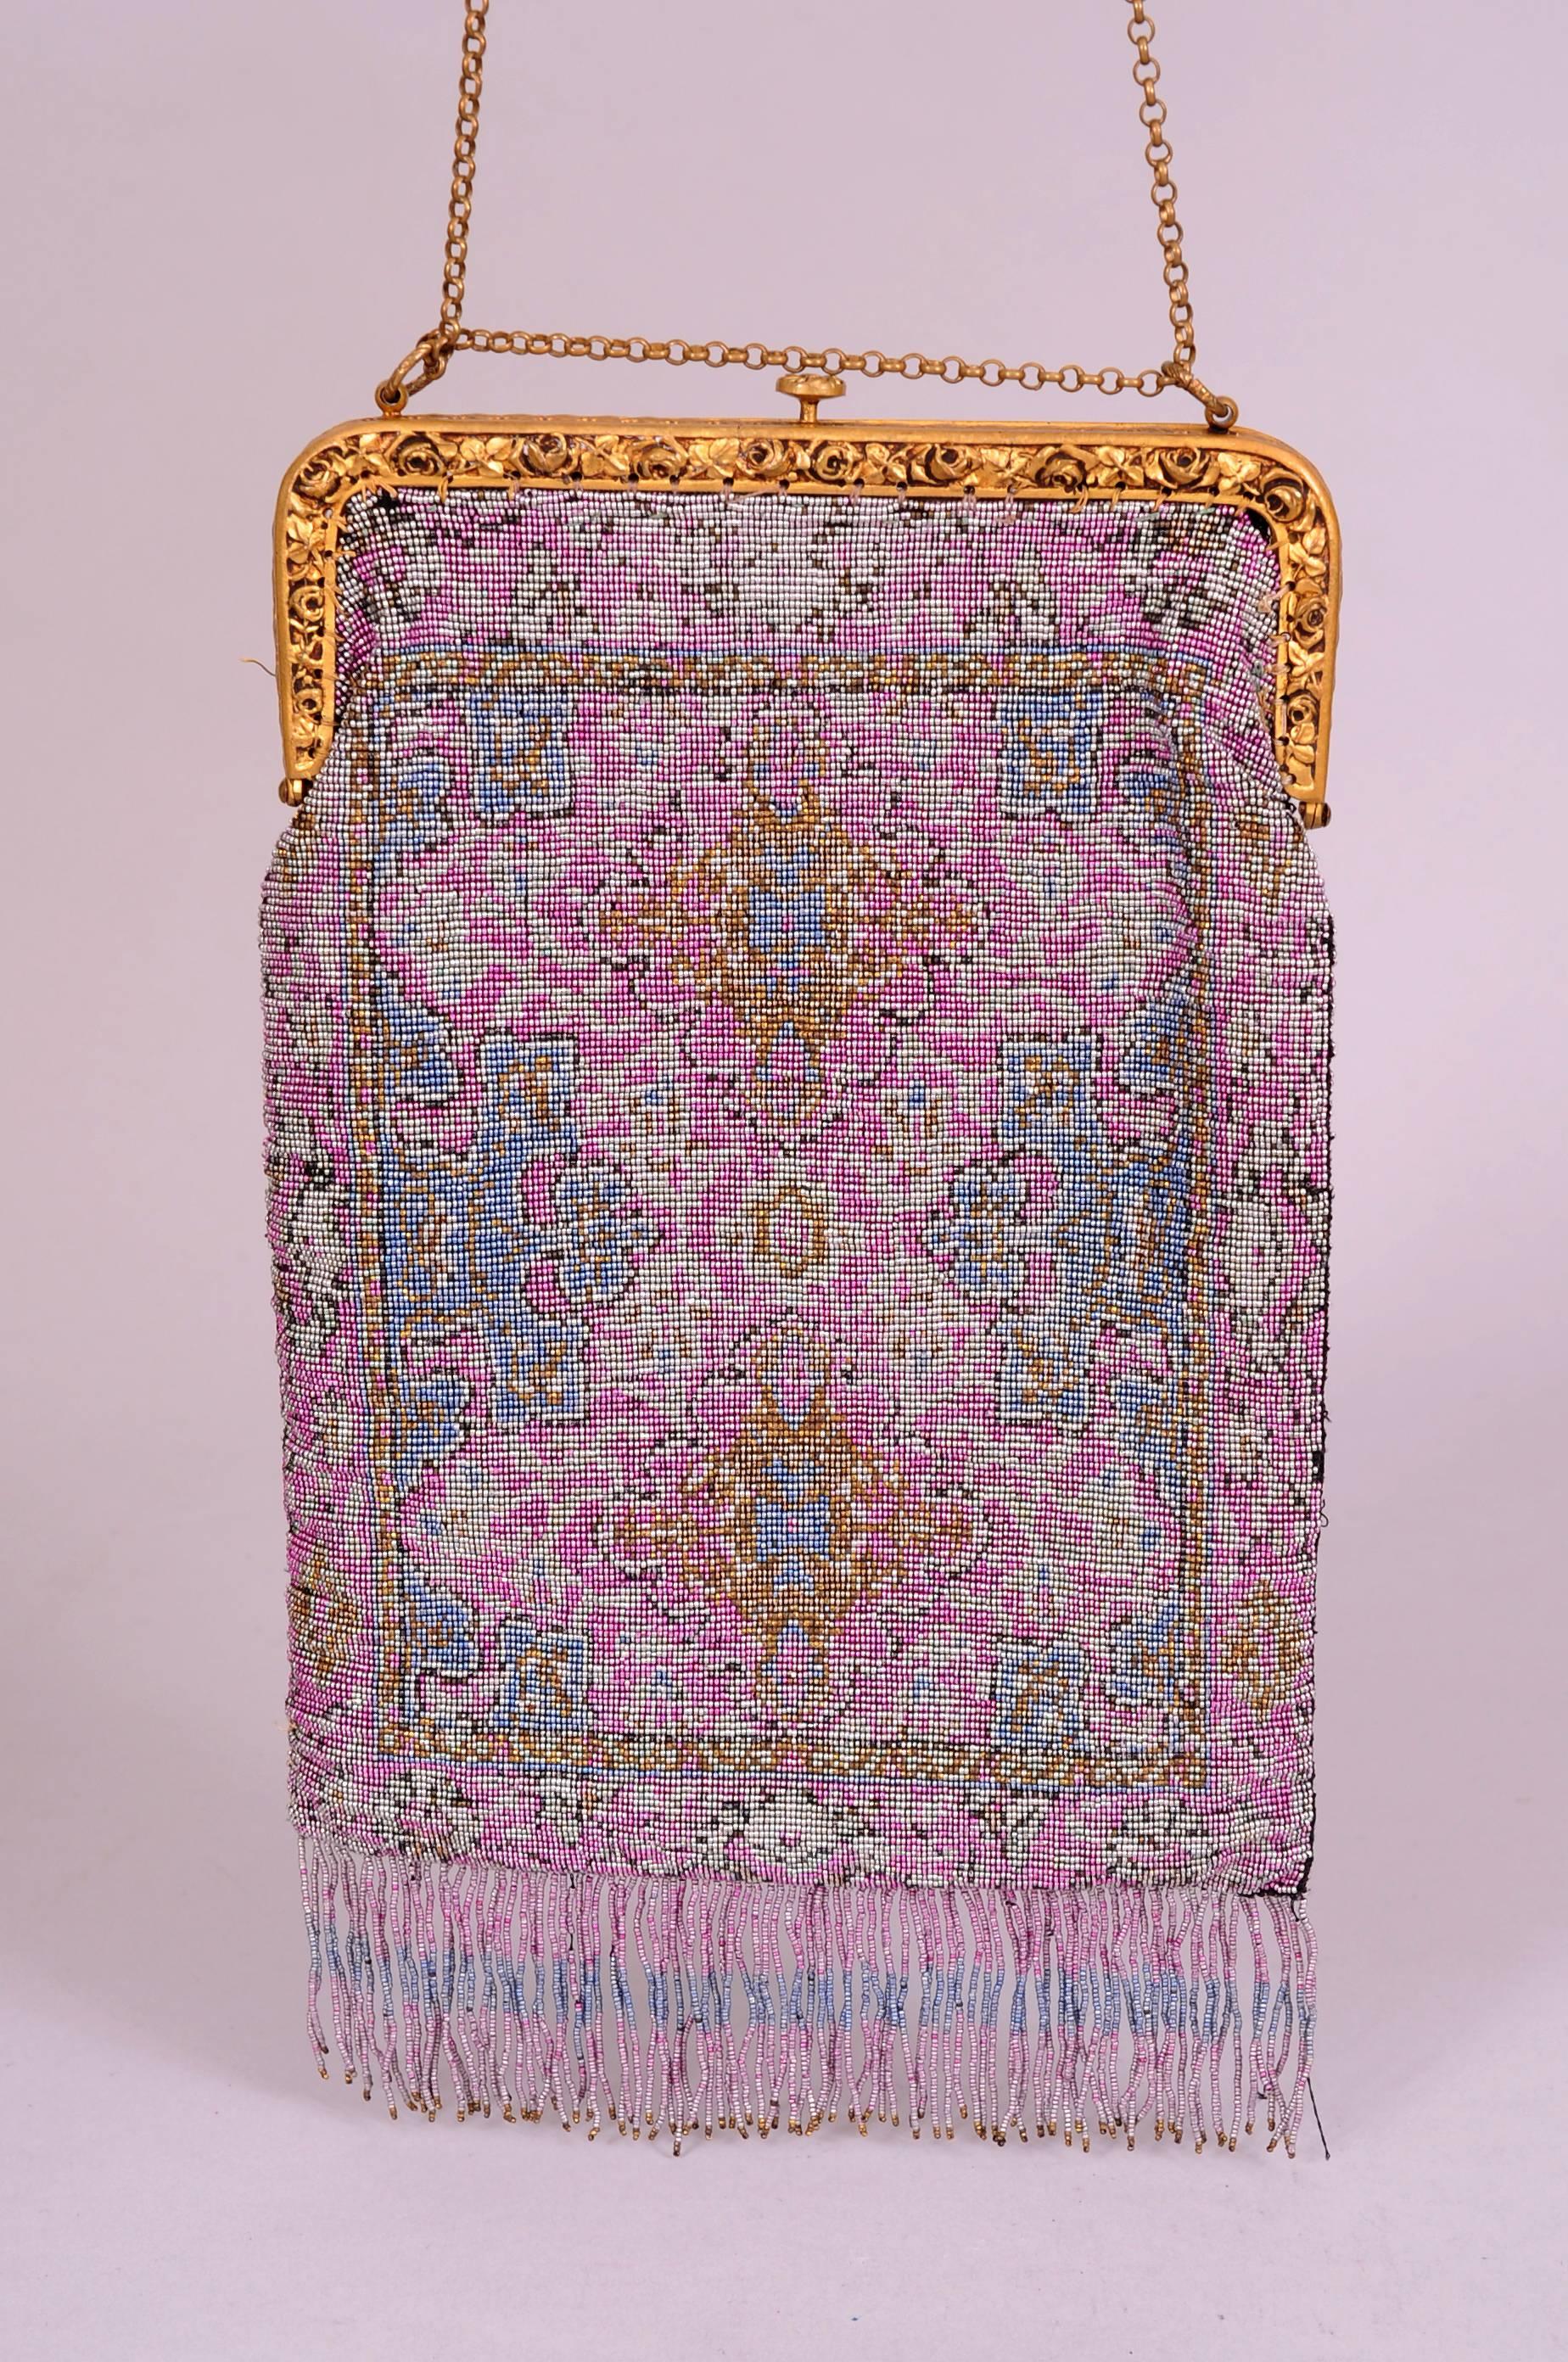 This stunning evening bag from the teens is worked in an unusual color combination using cut steel beads. Lavender, blue, silver and gold are the predominant colors in a design that is reminiscent of an Oriental carpet. The bag has a gold toned